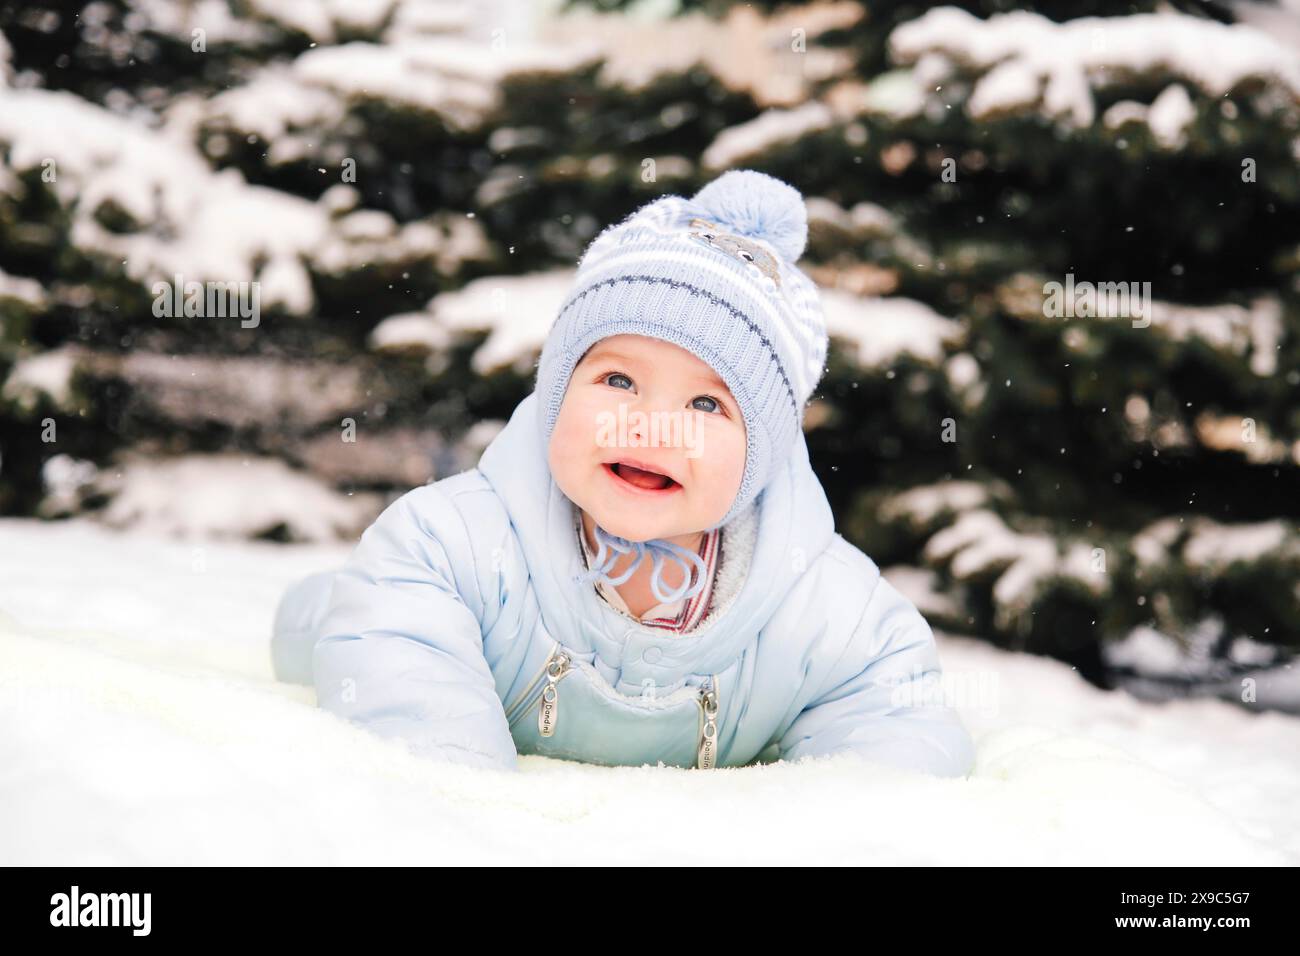 A baby in a blue jacket and knit hat enjoying the snow outdoors with a backdrop of snowy trees Stock Photo